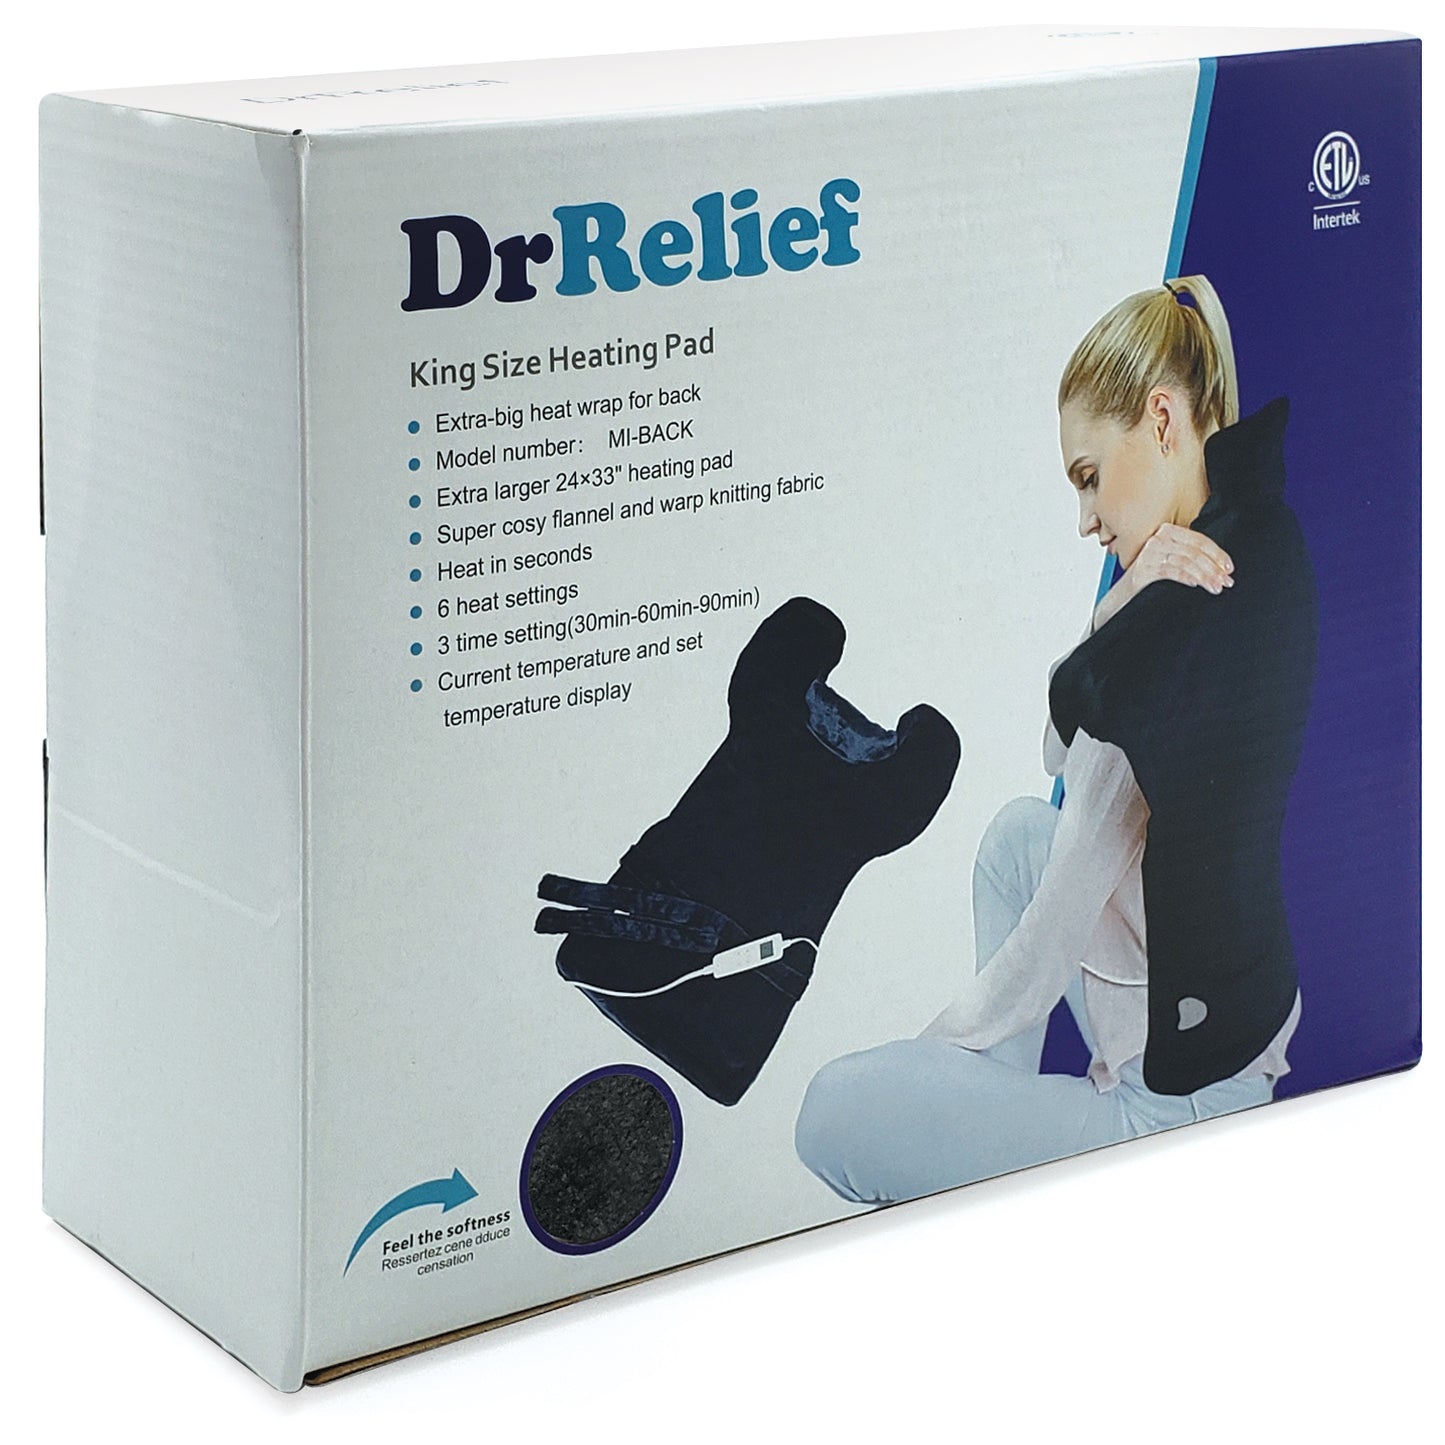 Dr Relief by SUNAID Extra Large Full Back Shoulders and Neck Heating Pad 24" x 33" Fast Heating Wrap with Auto Shut Off for Back, Neck and Shoulder, Abdomen, Waist Pain Relief, Dry/Moist Option (Gray)